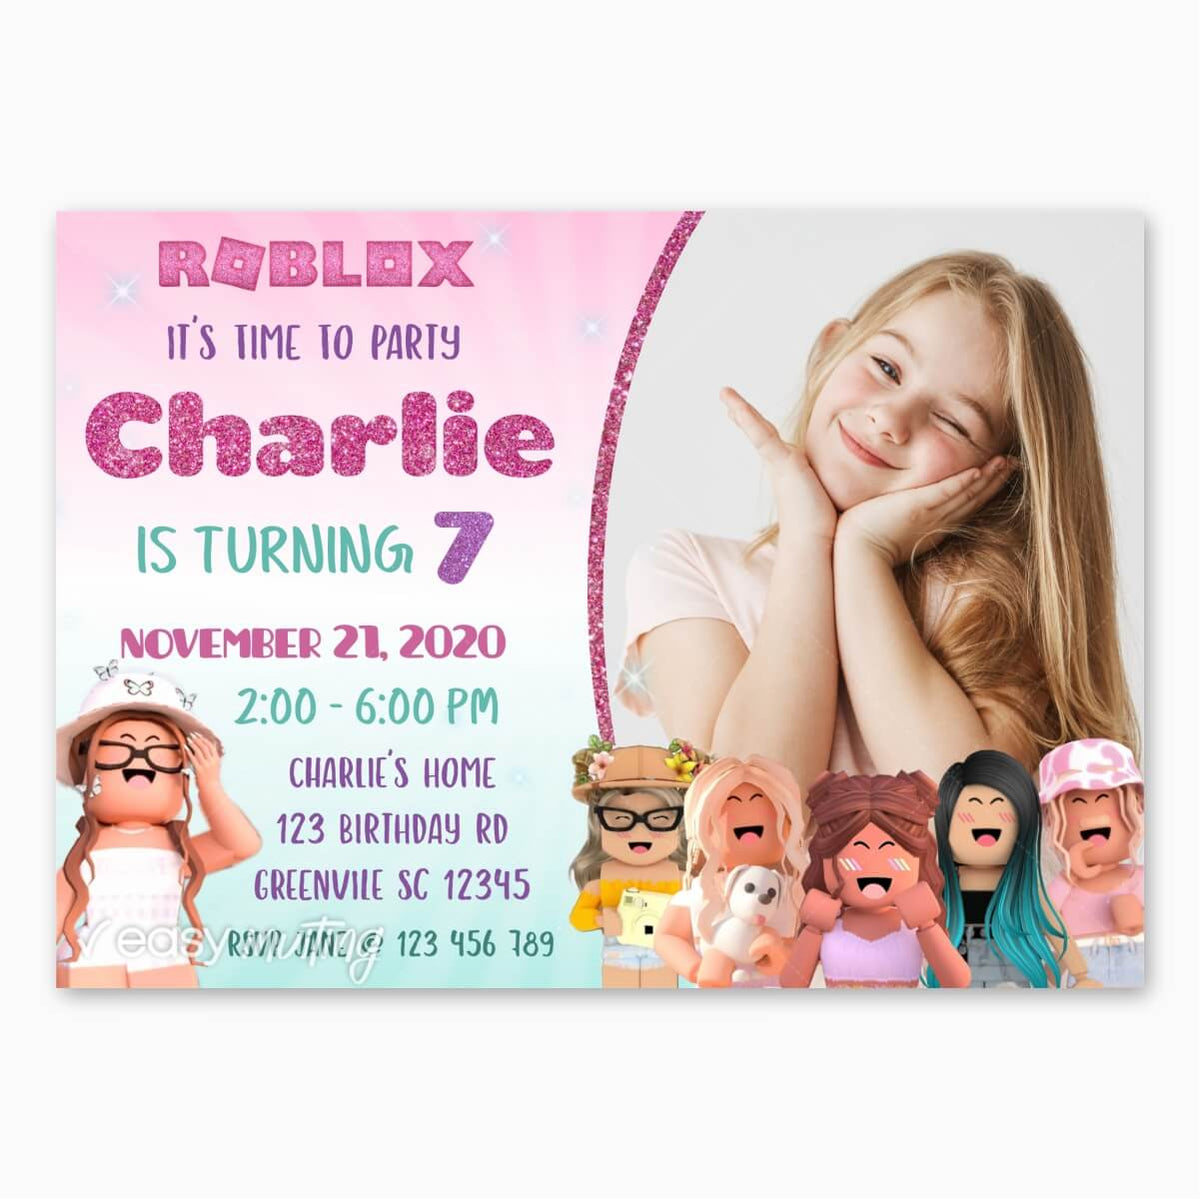 roblox-birthday-invitation-for-girls-with-photo-easy-inviting